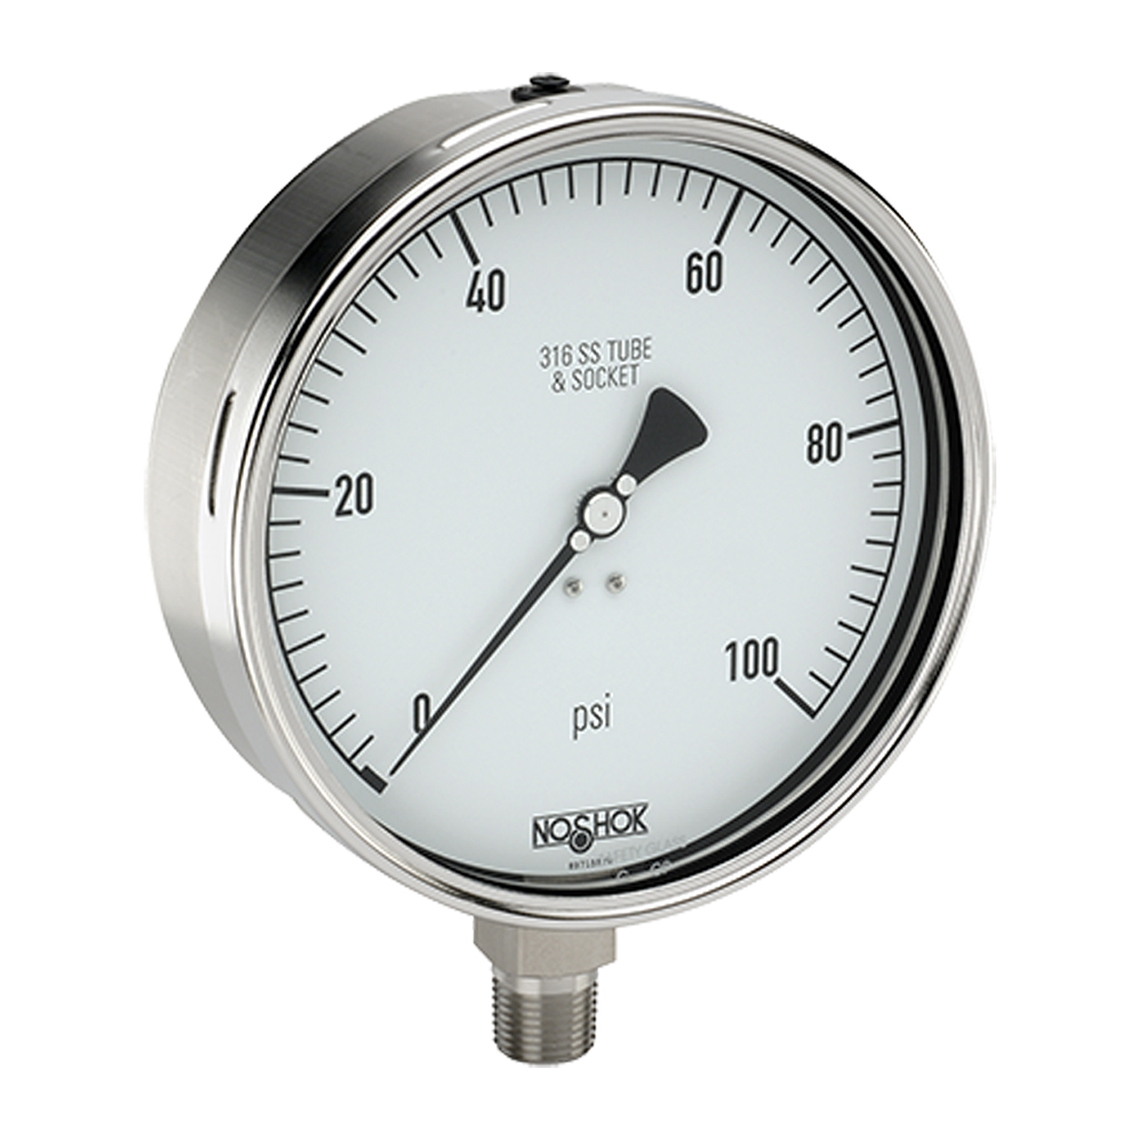 60-400-2000-psi 400/500 Series All Stainless Steel Dry and Liquid Filled Pressure Gauges